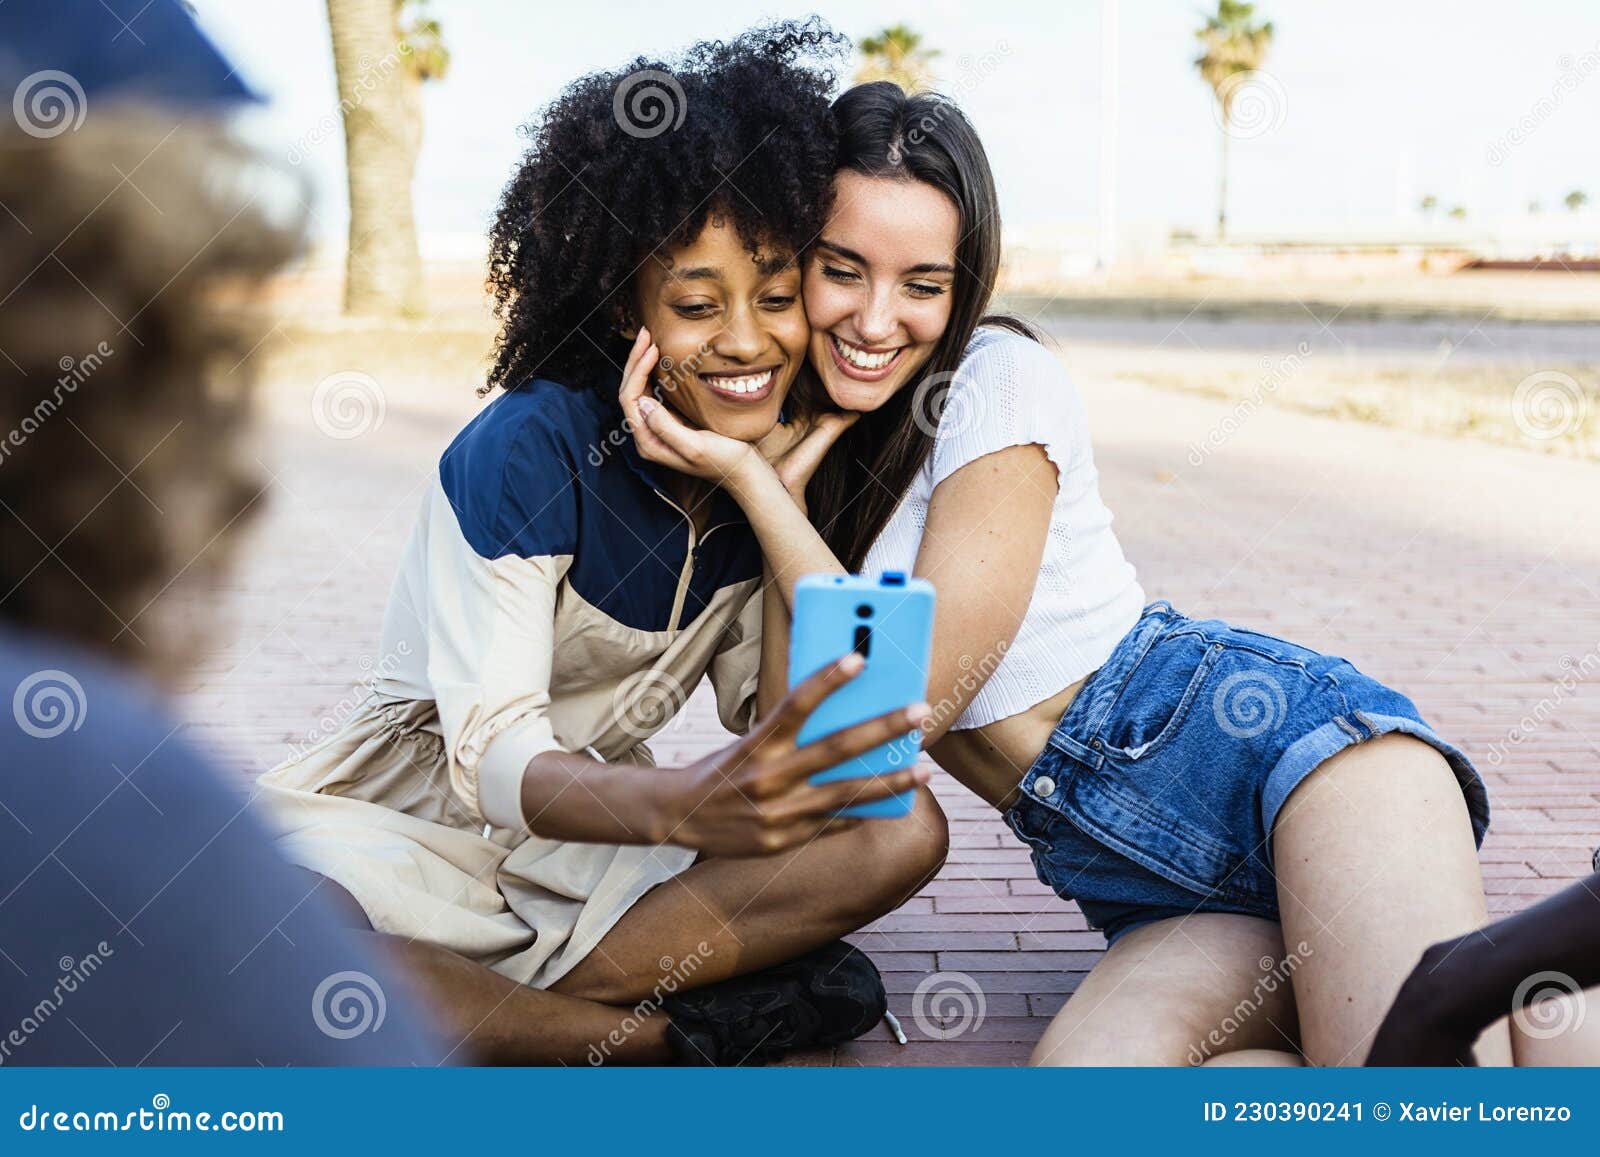 Happy Multiracial Women Friends Taking A Selfie With Smart Phone 